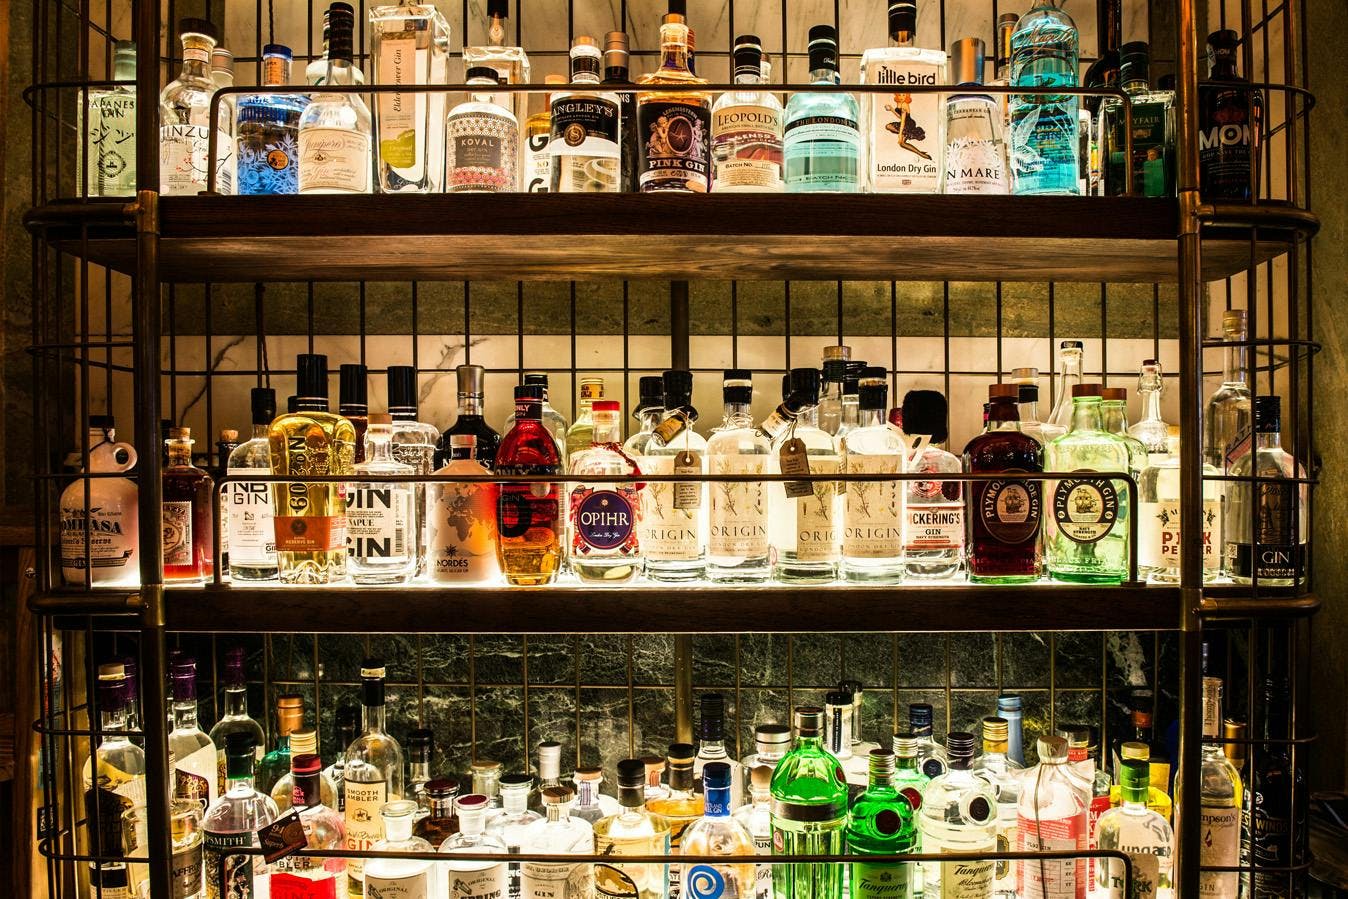 London’s biggest gin bar is open for business - and it's got a LOT of gin